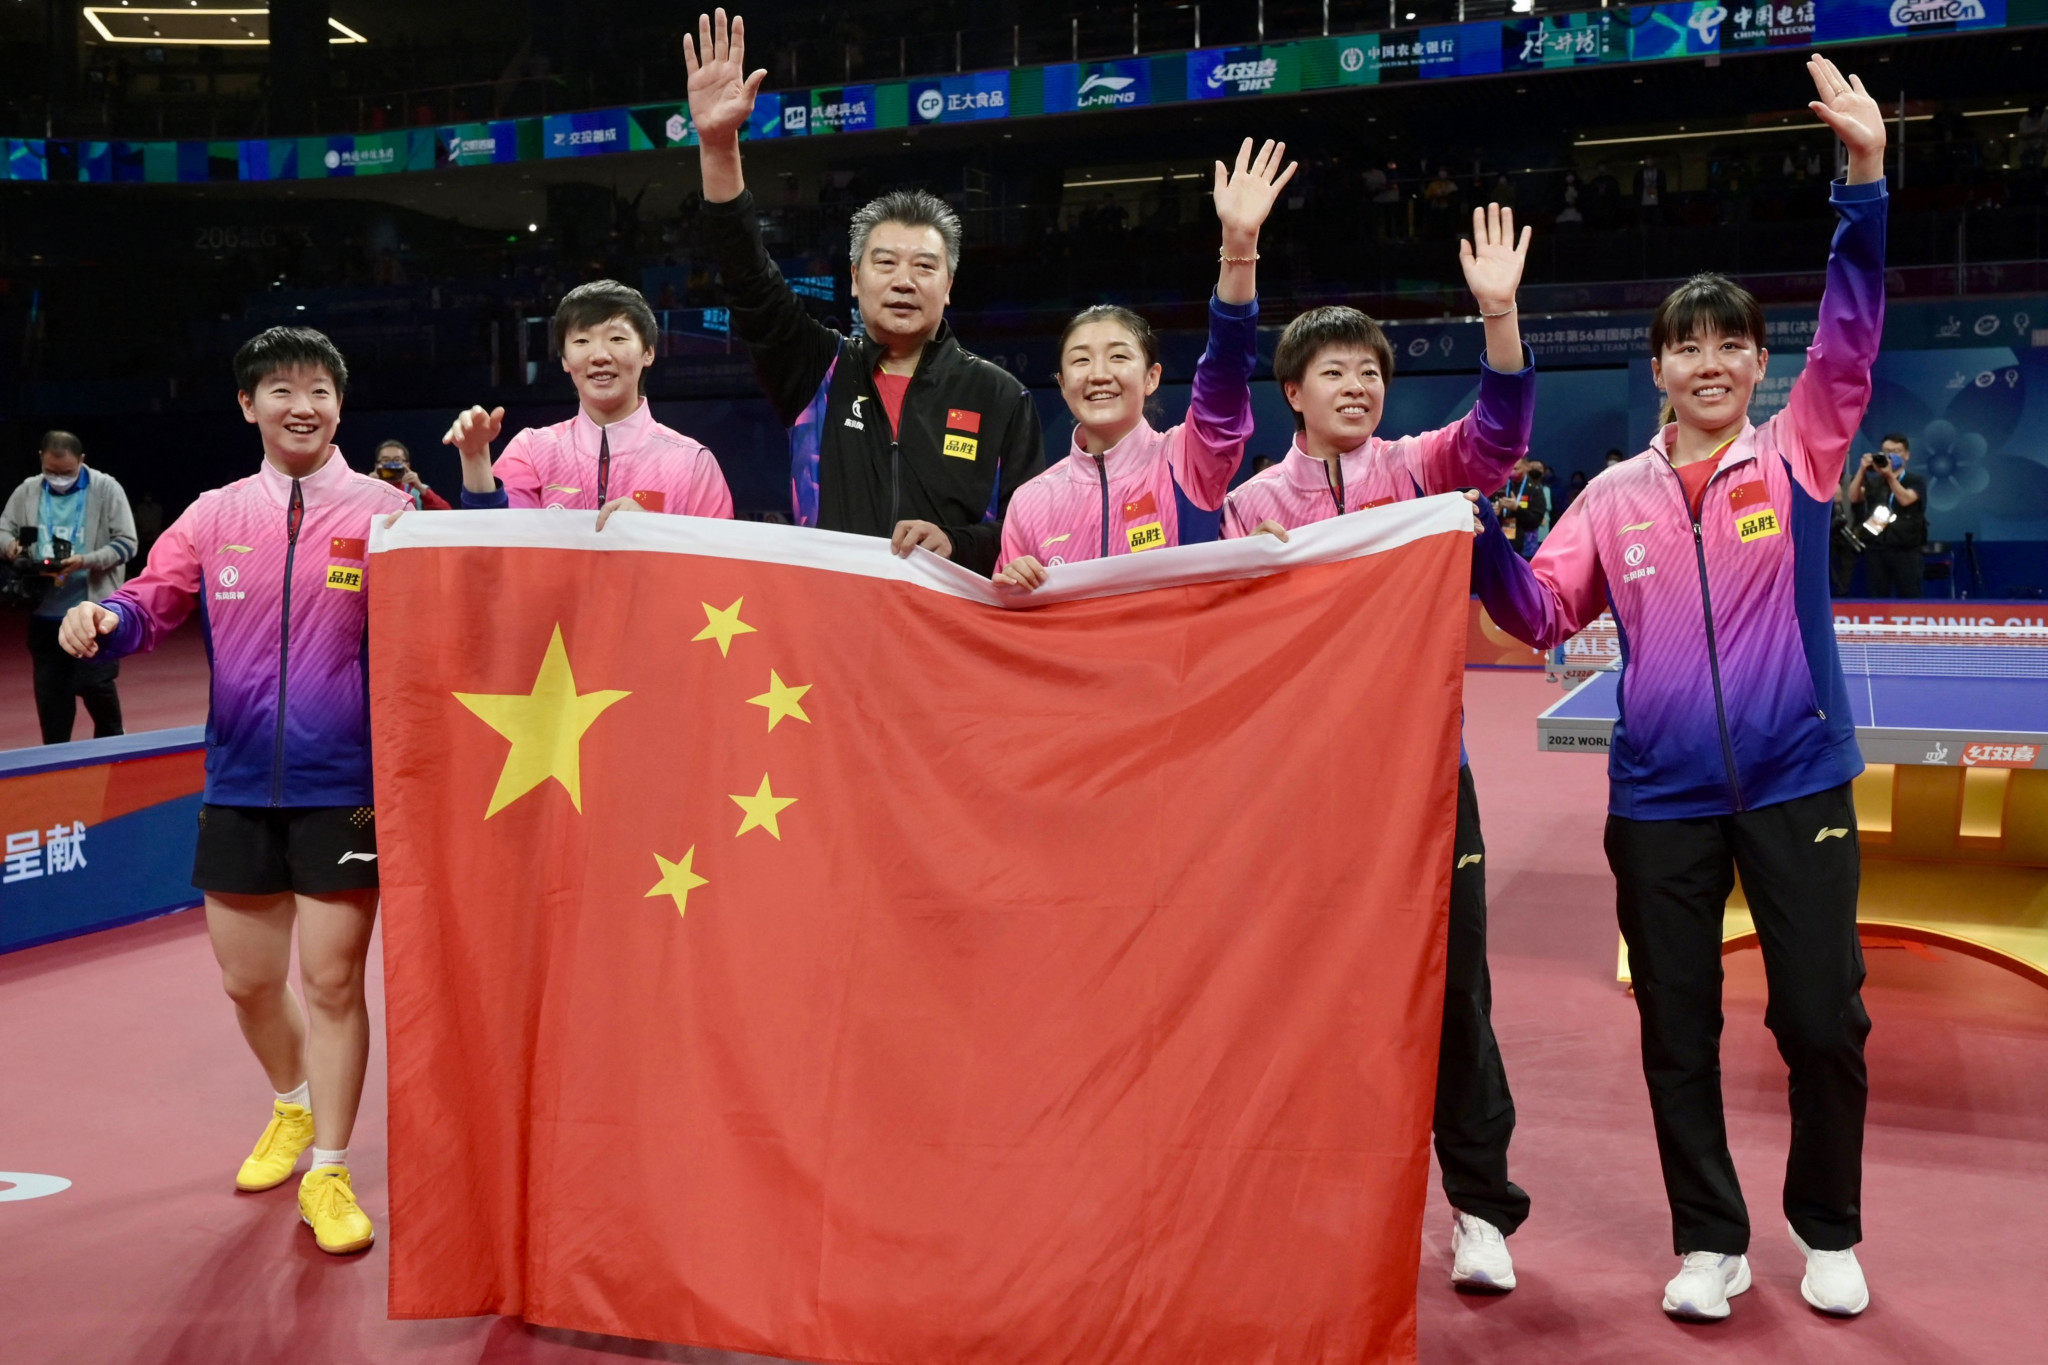 China ease to women's title and reach men's final at World Team Table Tennis Championships